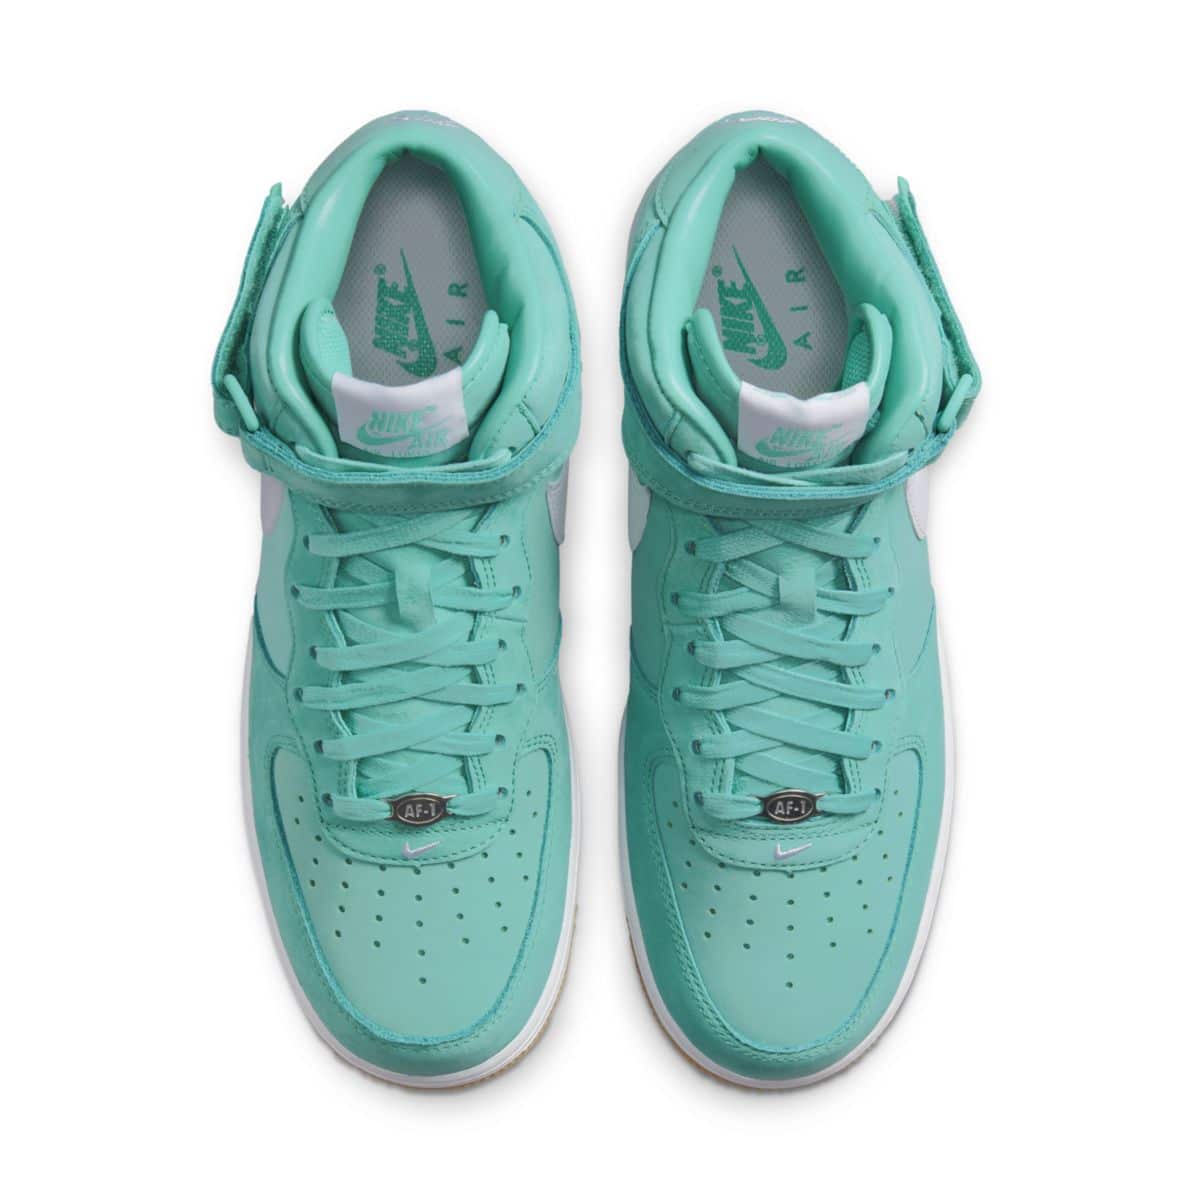 Nike Air Force 1 Mid Turquoise DV2219-300 5